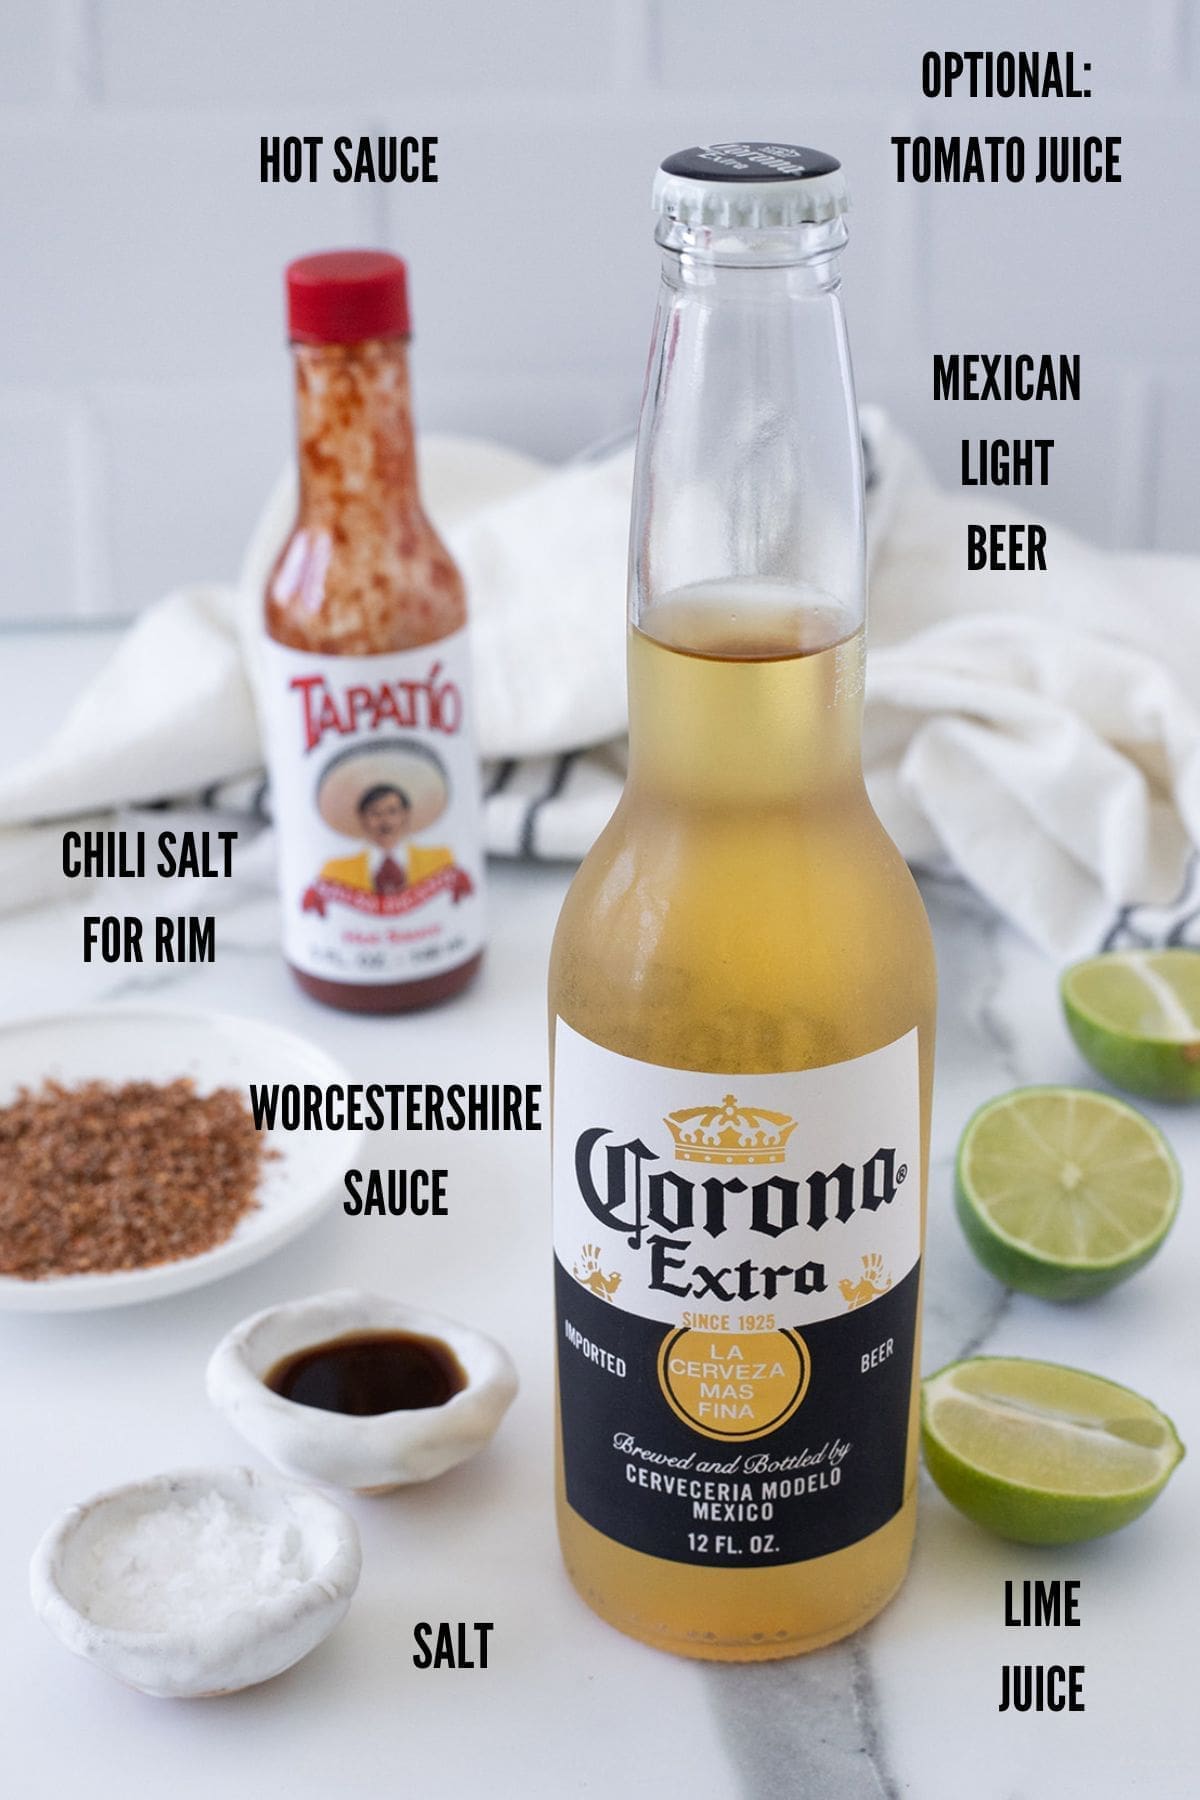 Labeled photo showing Michelada ingredients.